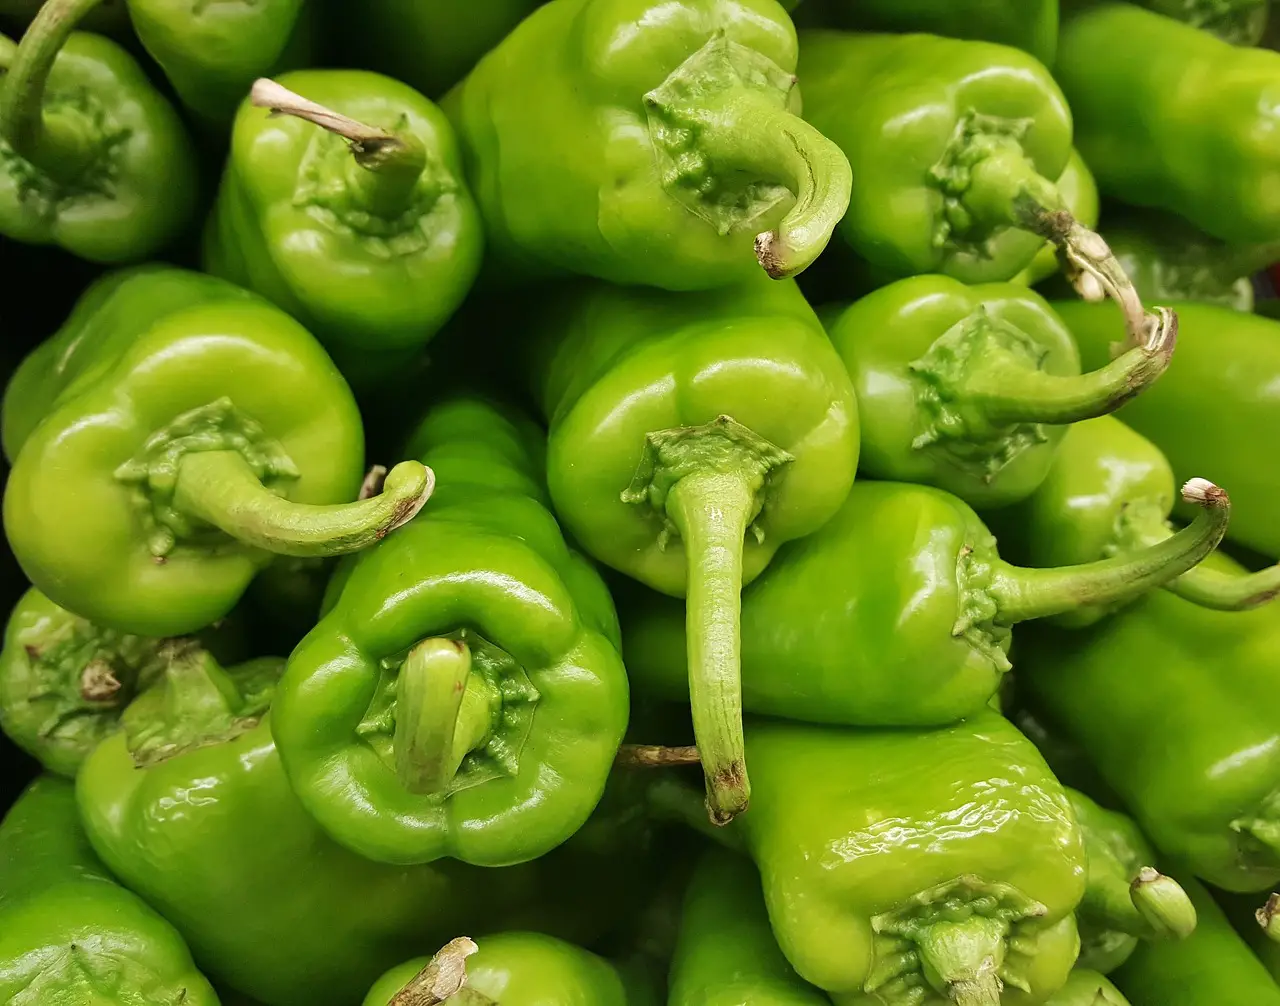 anaheim peppers, chiles, chili peppers-1342986.jpg